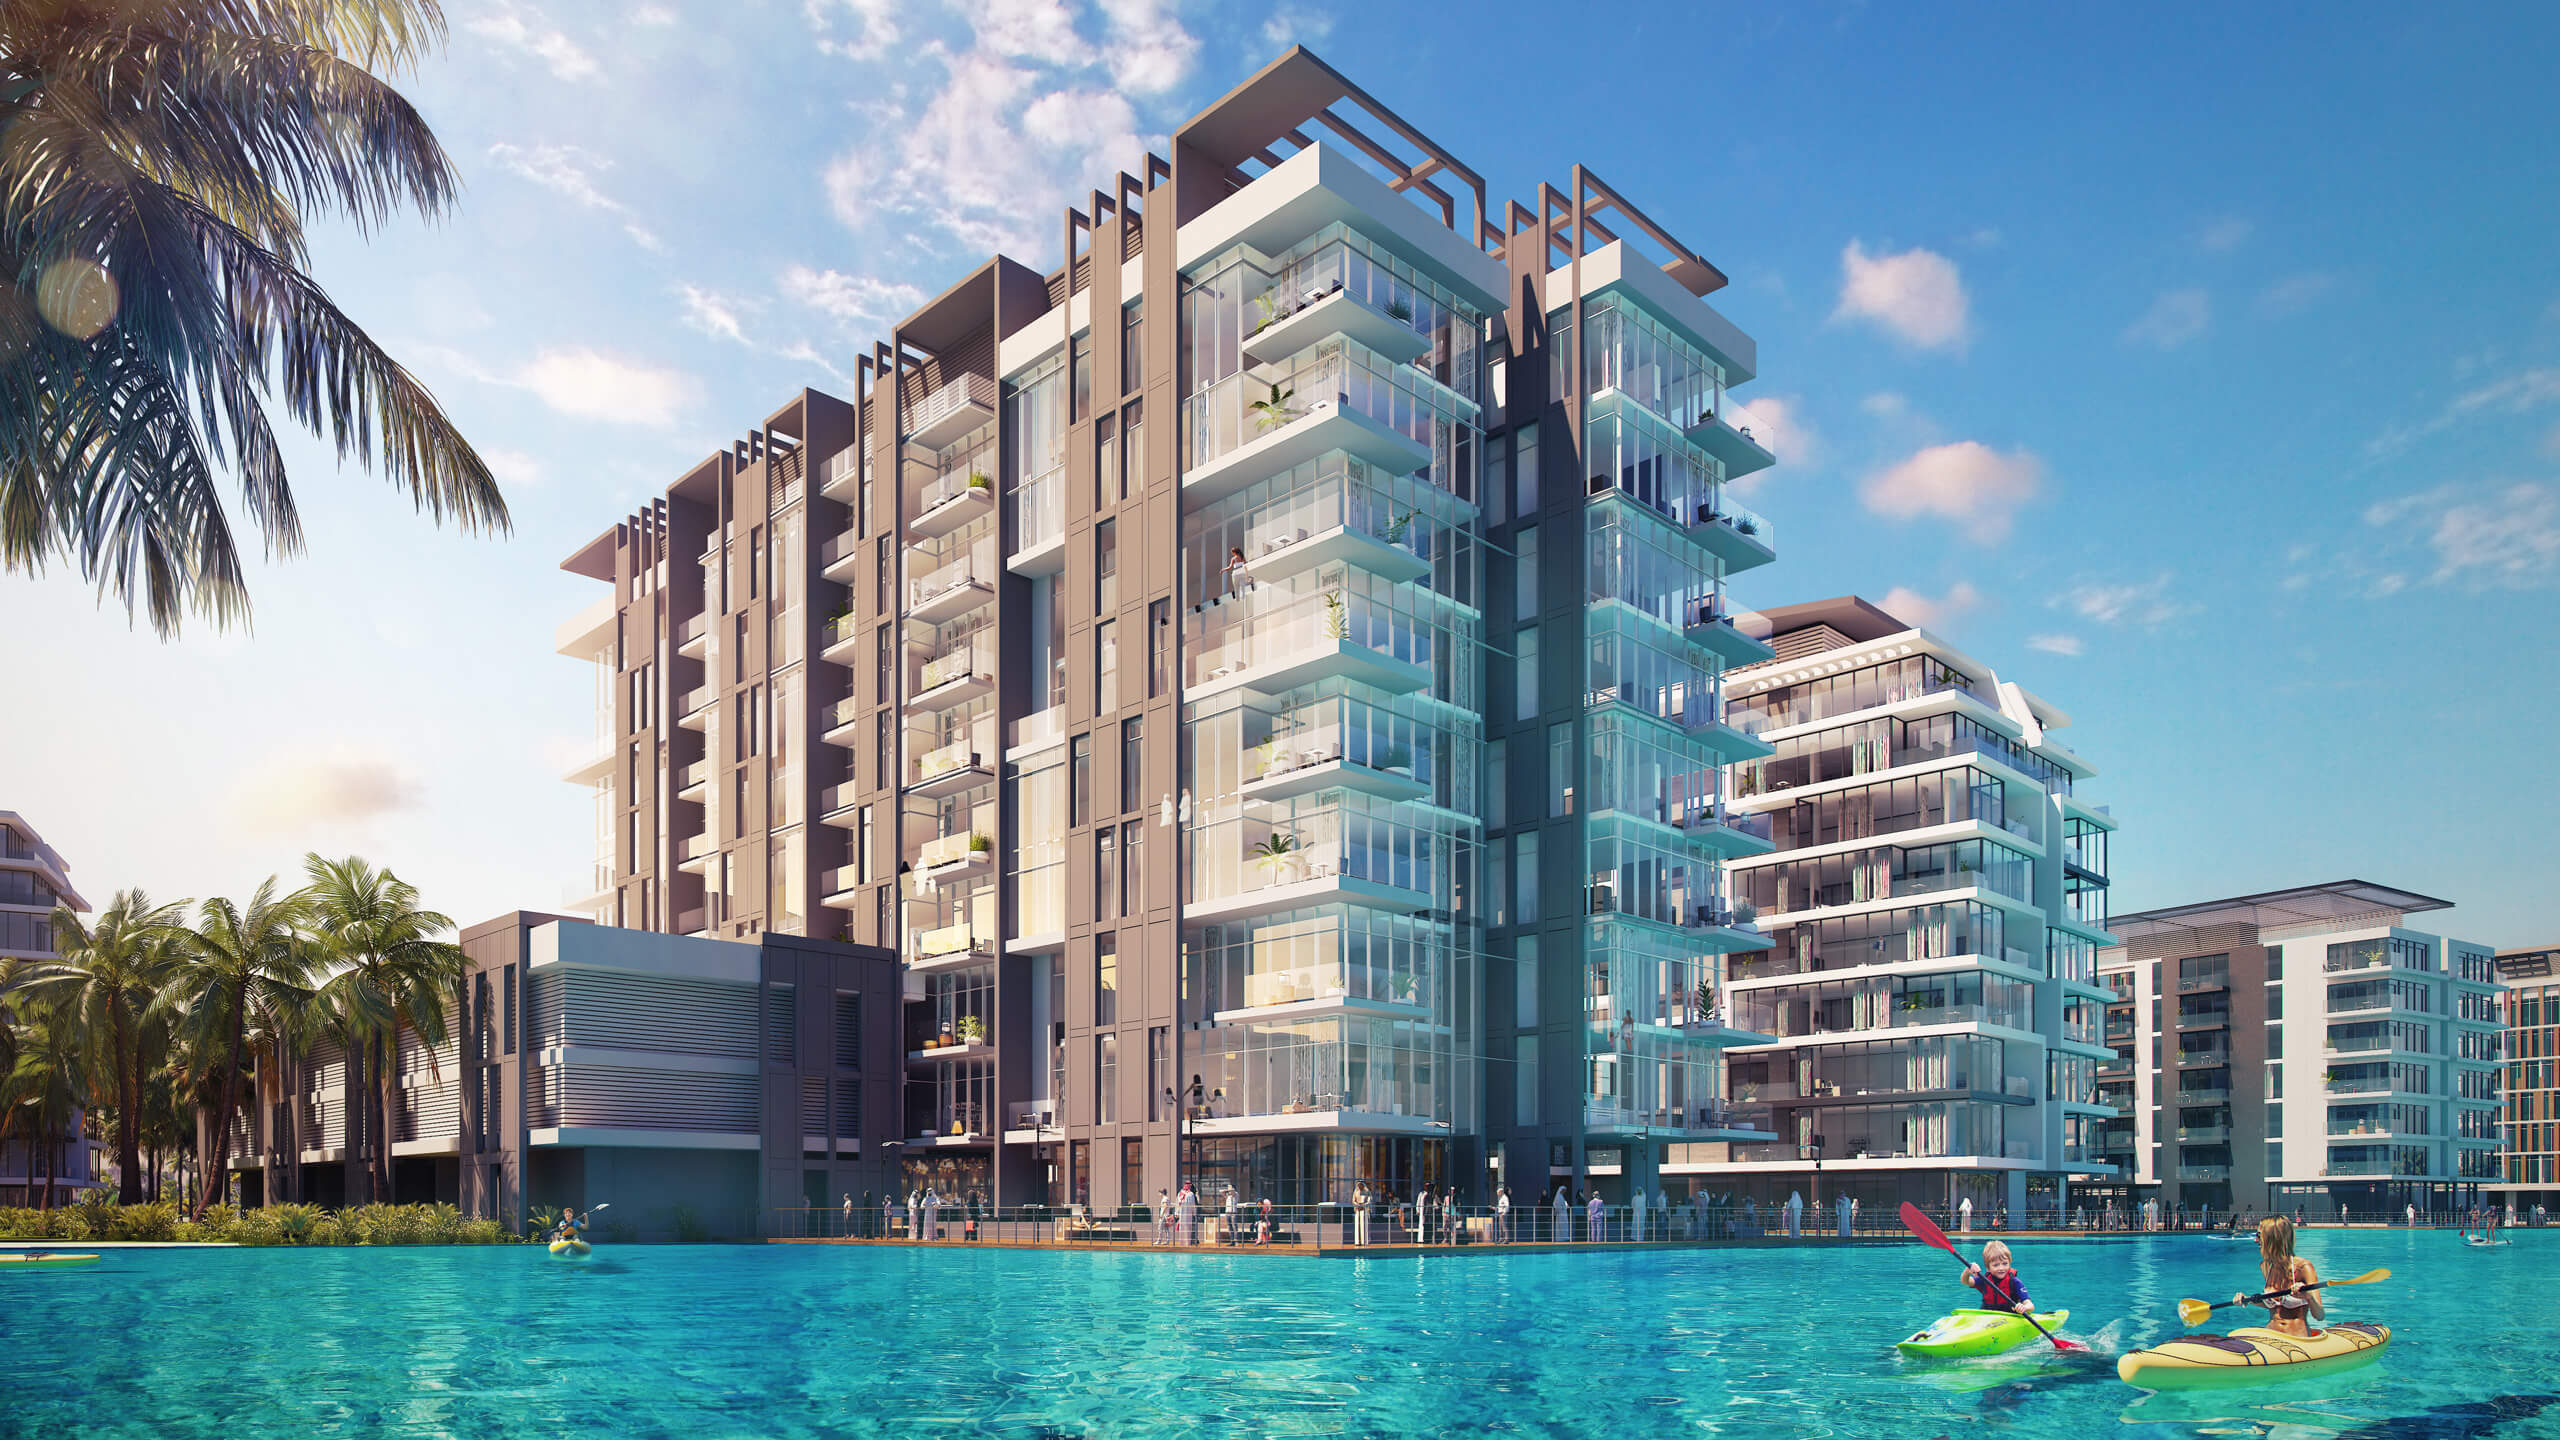 District One Residences in MBR City, Dubai